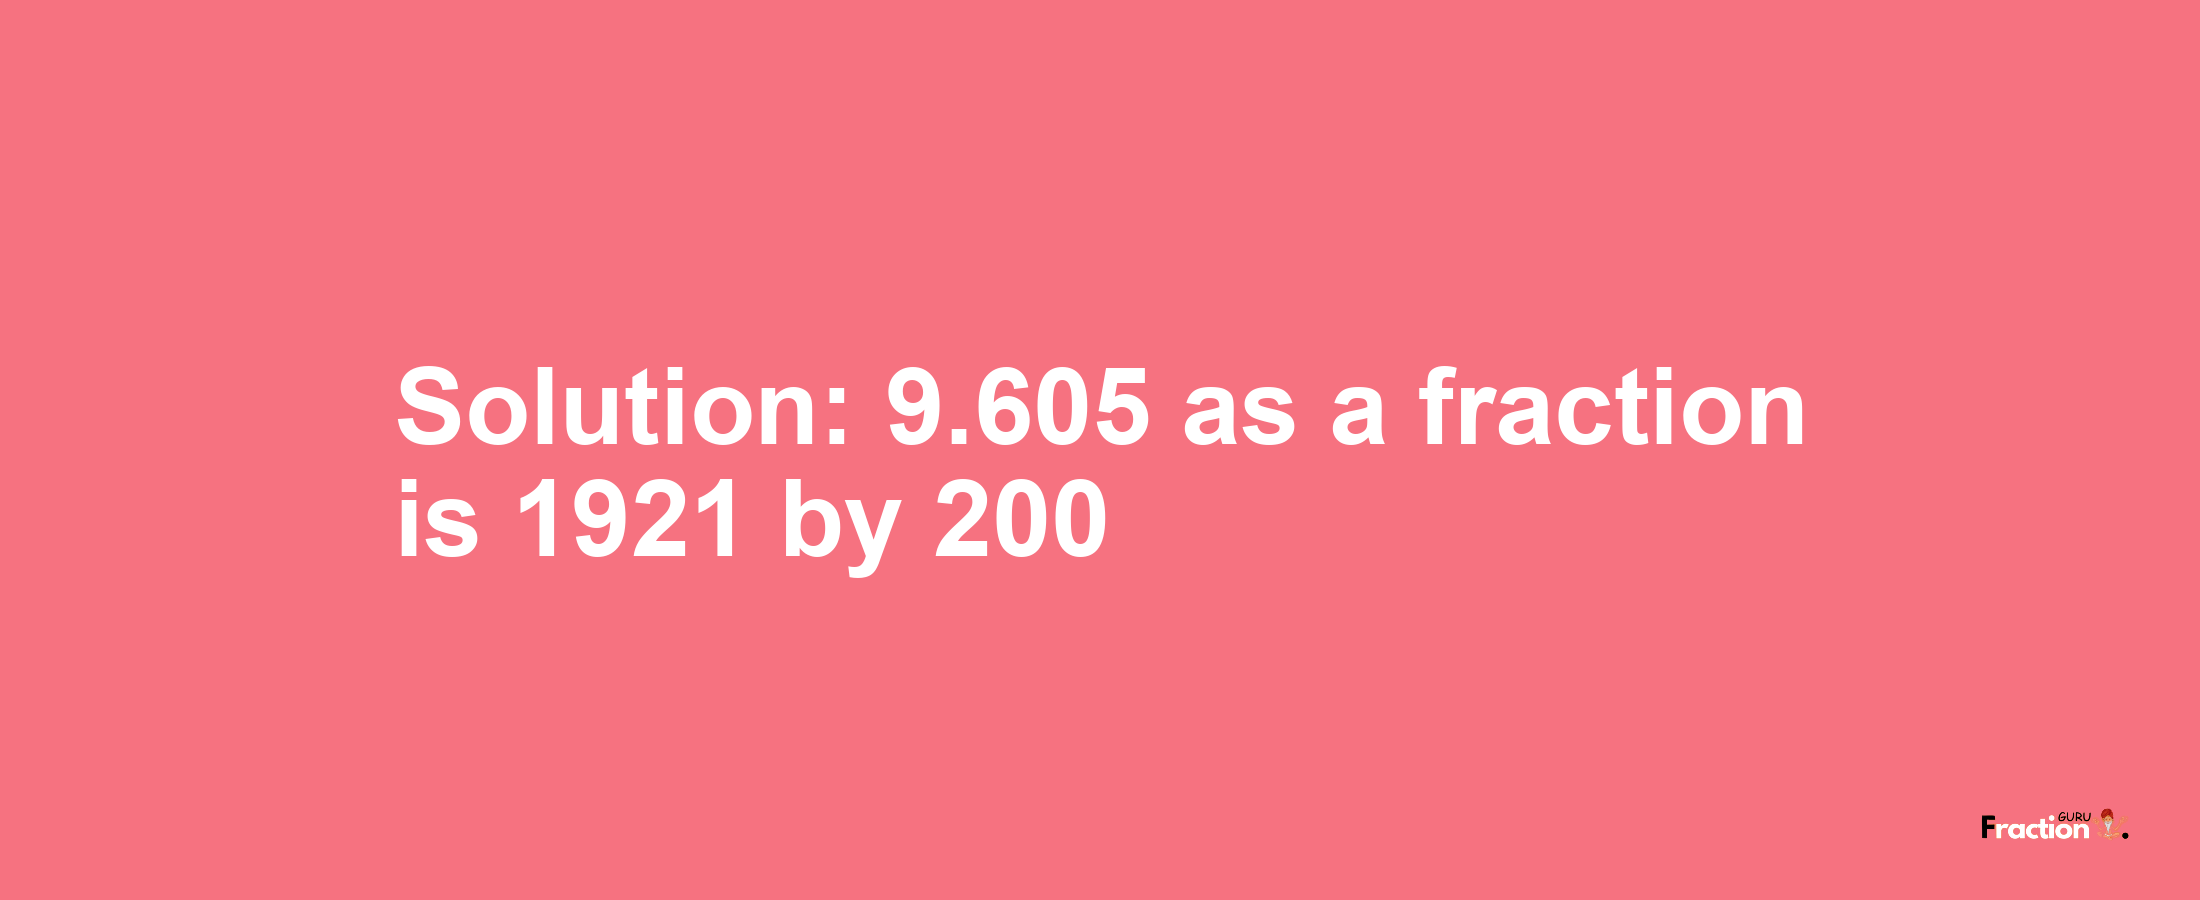 Solution:9.605 as a fraction is 1921/200